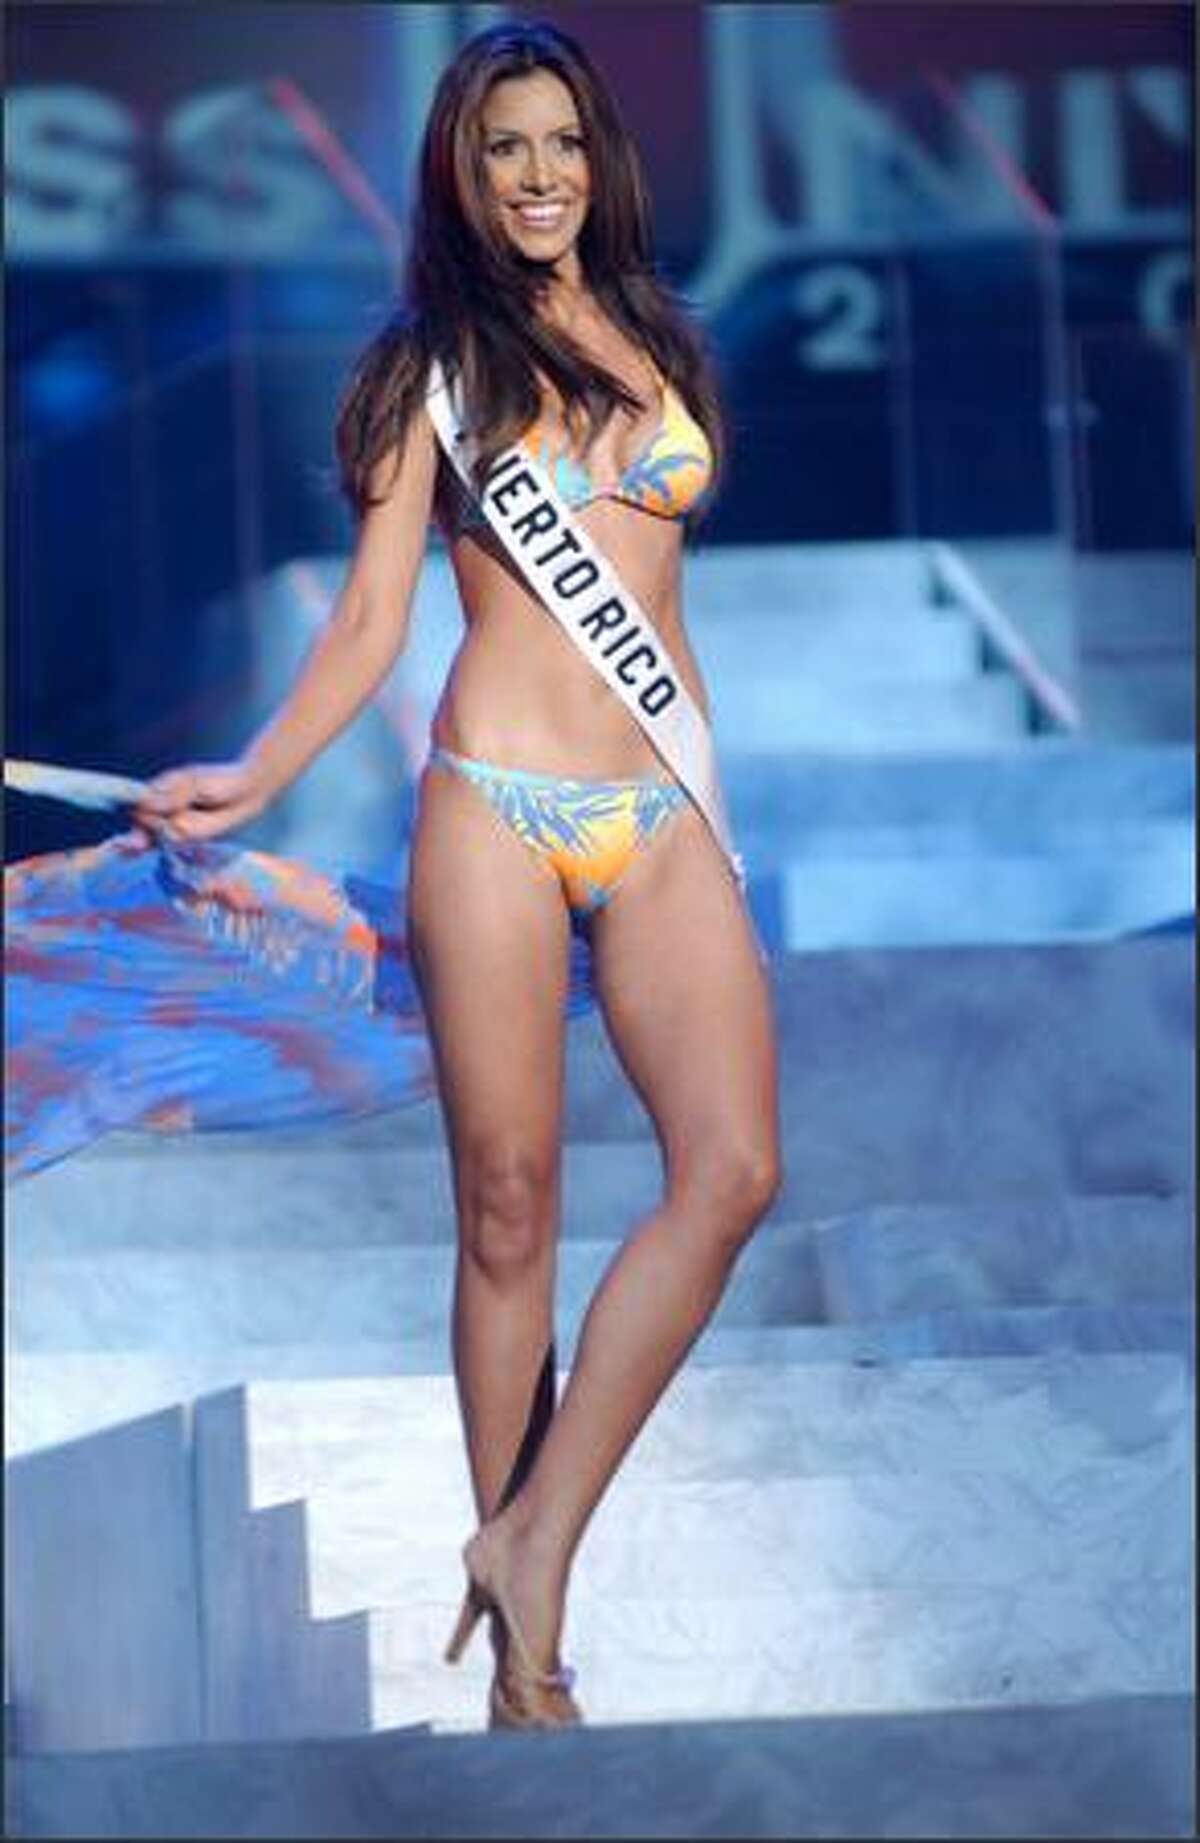 Alba Giselle Reyes Santos, Miss Puerto Rico, competes in her Endless Sun swimsuit during the 2004 Miss Universe Presentation Show on May 27 at CEMEXPO in Quito, Ecuador. Each delegate is judged by a preliminary panel of distinguished judges in three categories consisting of individual interview, swimsuit competition and evening gown competition. The scores will be tallied and the top 15 delegates will be announced during the NBC broadcast of the 53rd annual Miss Universe competition on June 1 at 9 p.m. (delayed PT).